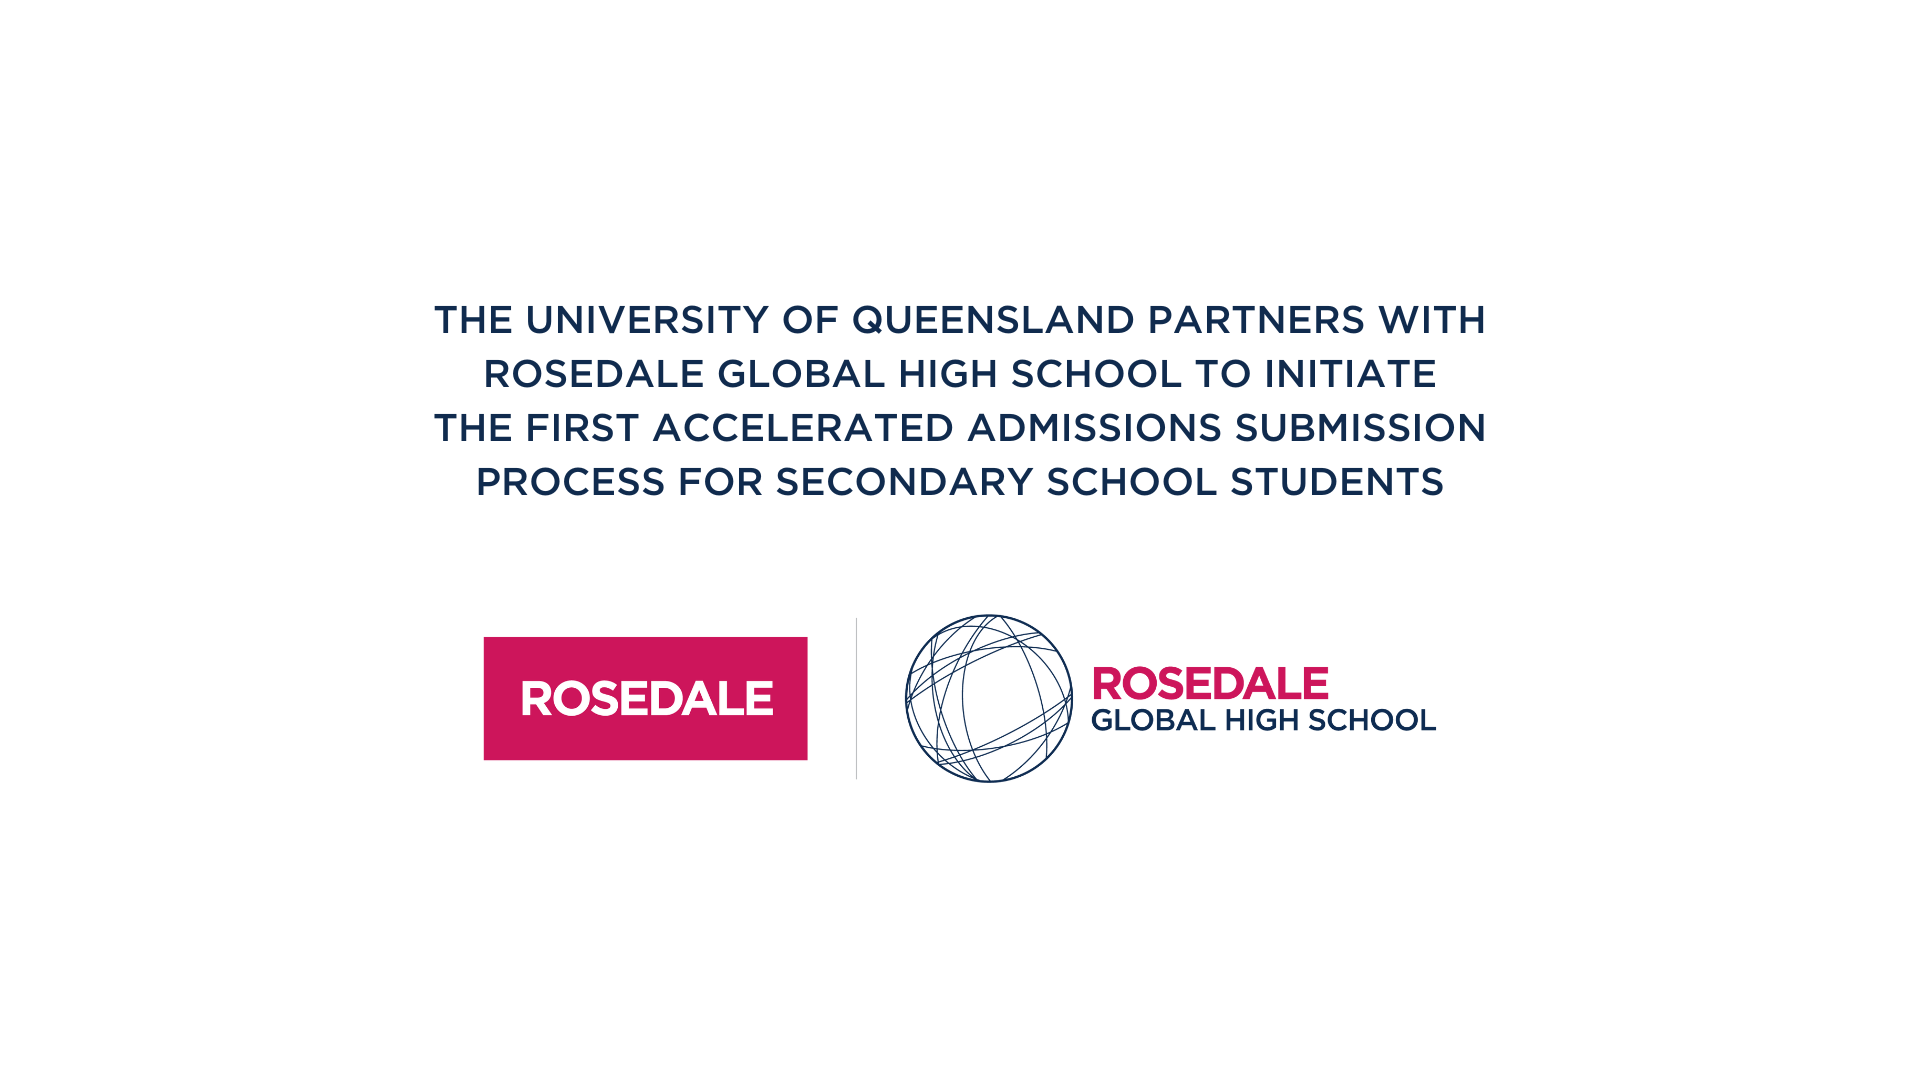 Statement: The University of Queensland partners with Rosedale Global High School to initiate the first accelerated admissions submission process for secondary school students